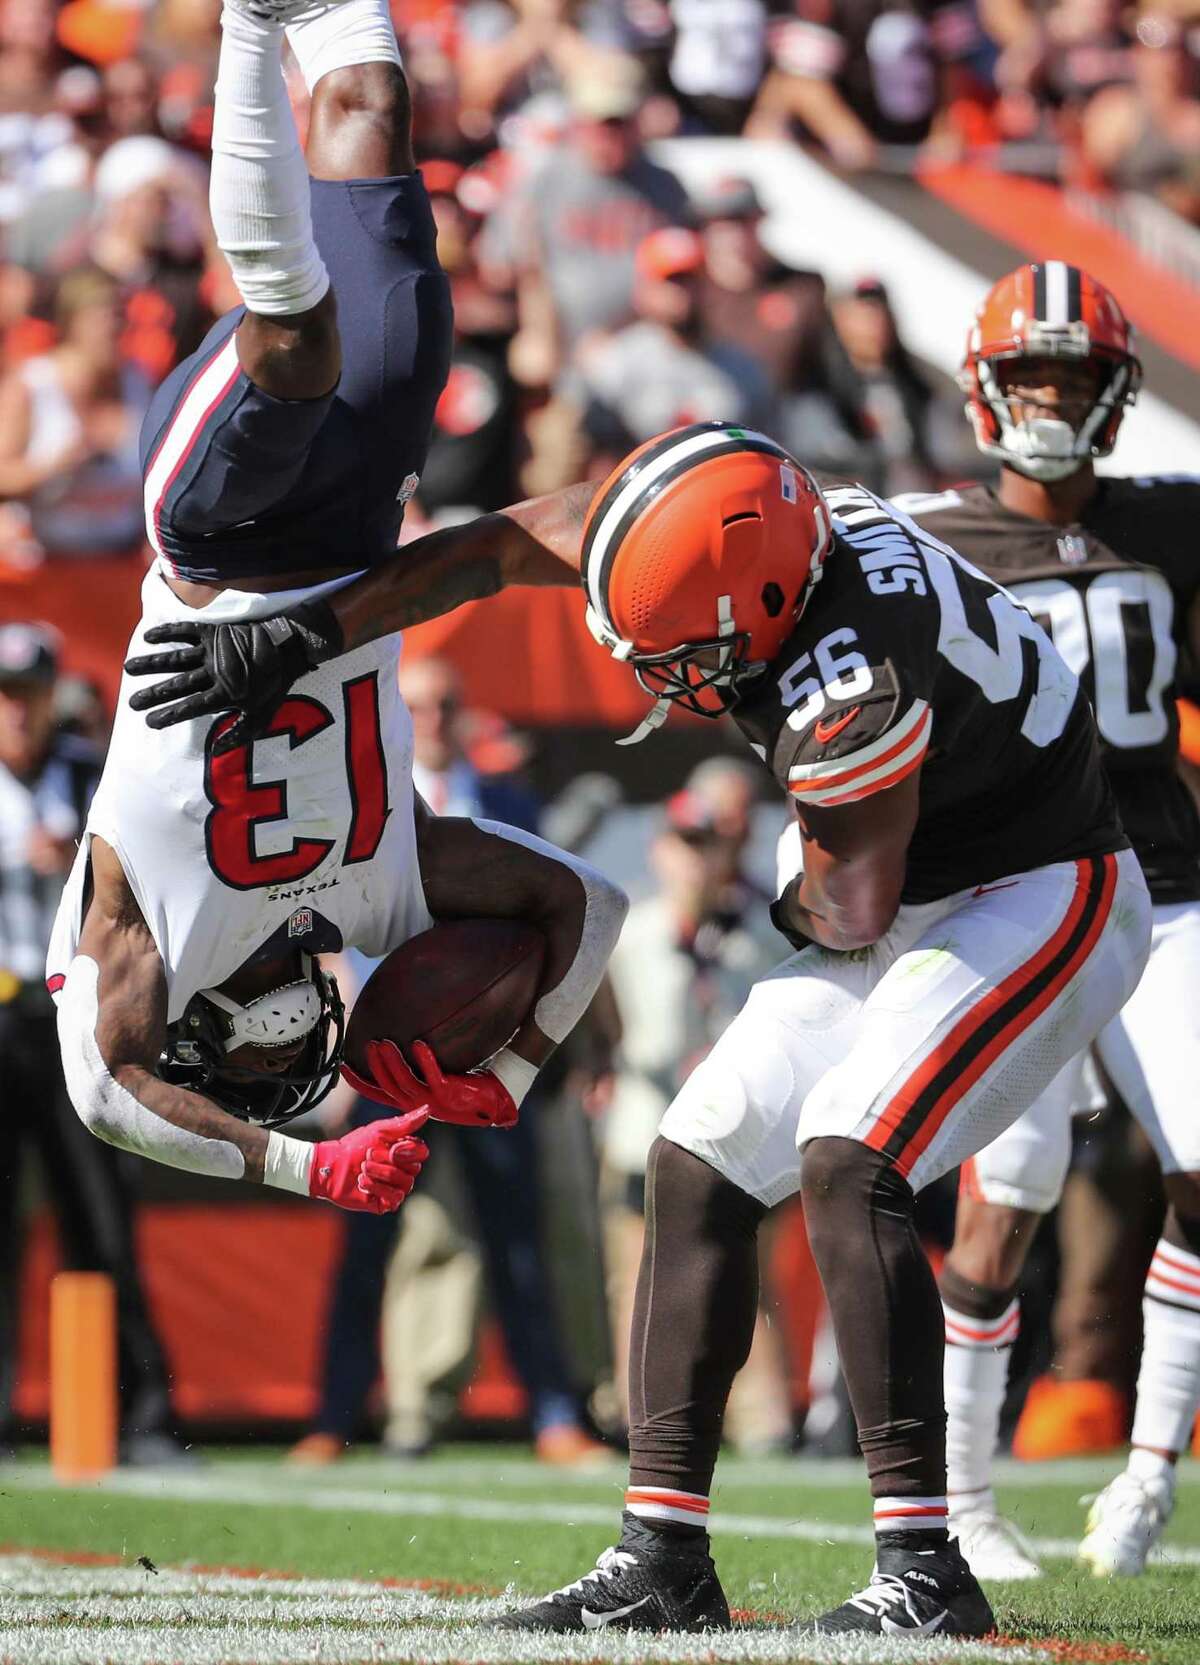 Houston Texans wide receiver Brandin Cooks (13) flips as he is hit by Cleveland Browns linebacker Malcolm Smith (56) after scoring on a 2-yard reception during the second half of an NFL football game Sunday, Sept. 19, 2021, in Cleveland.